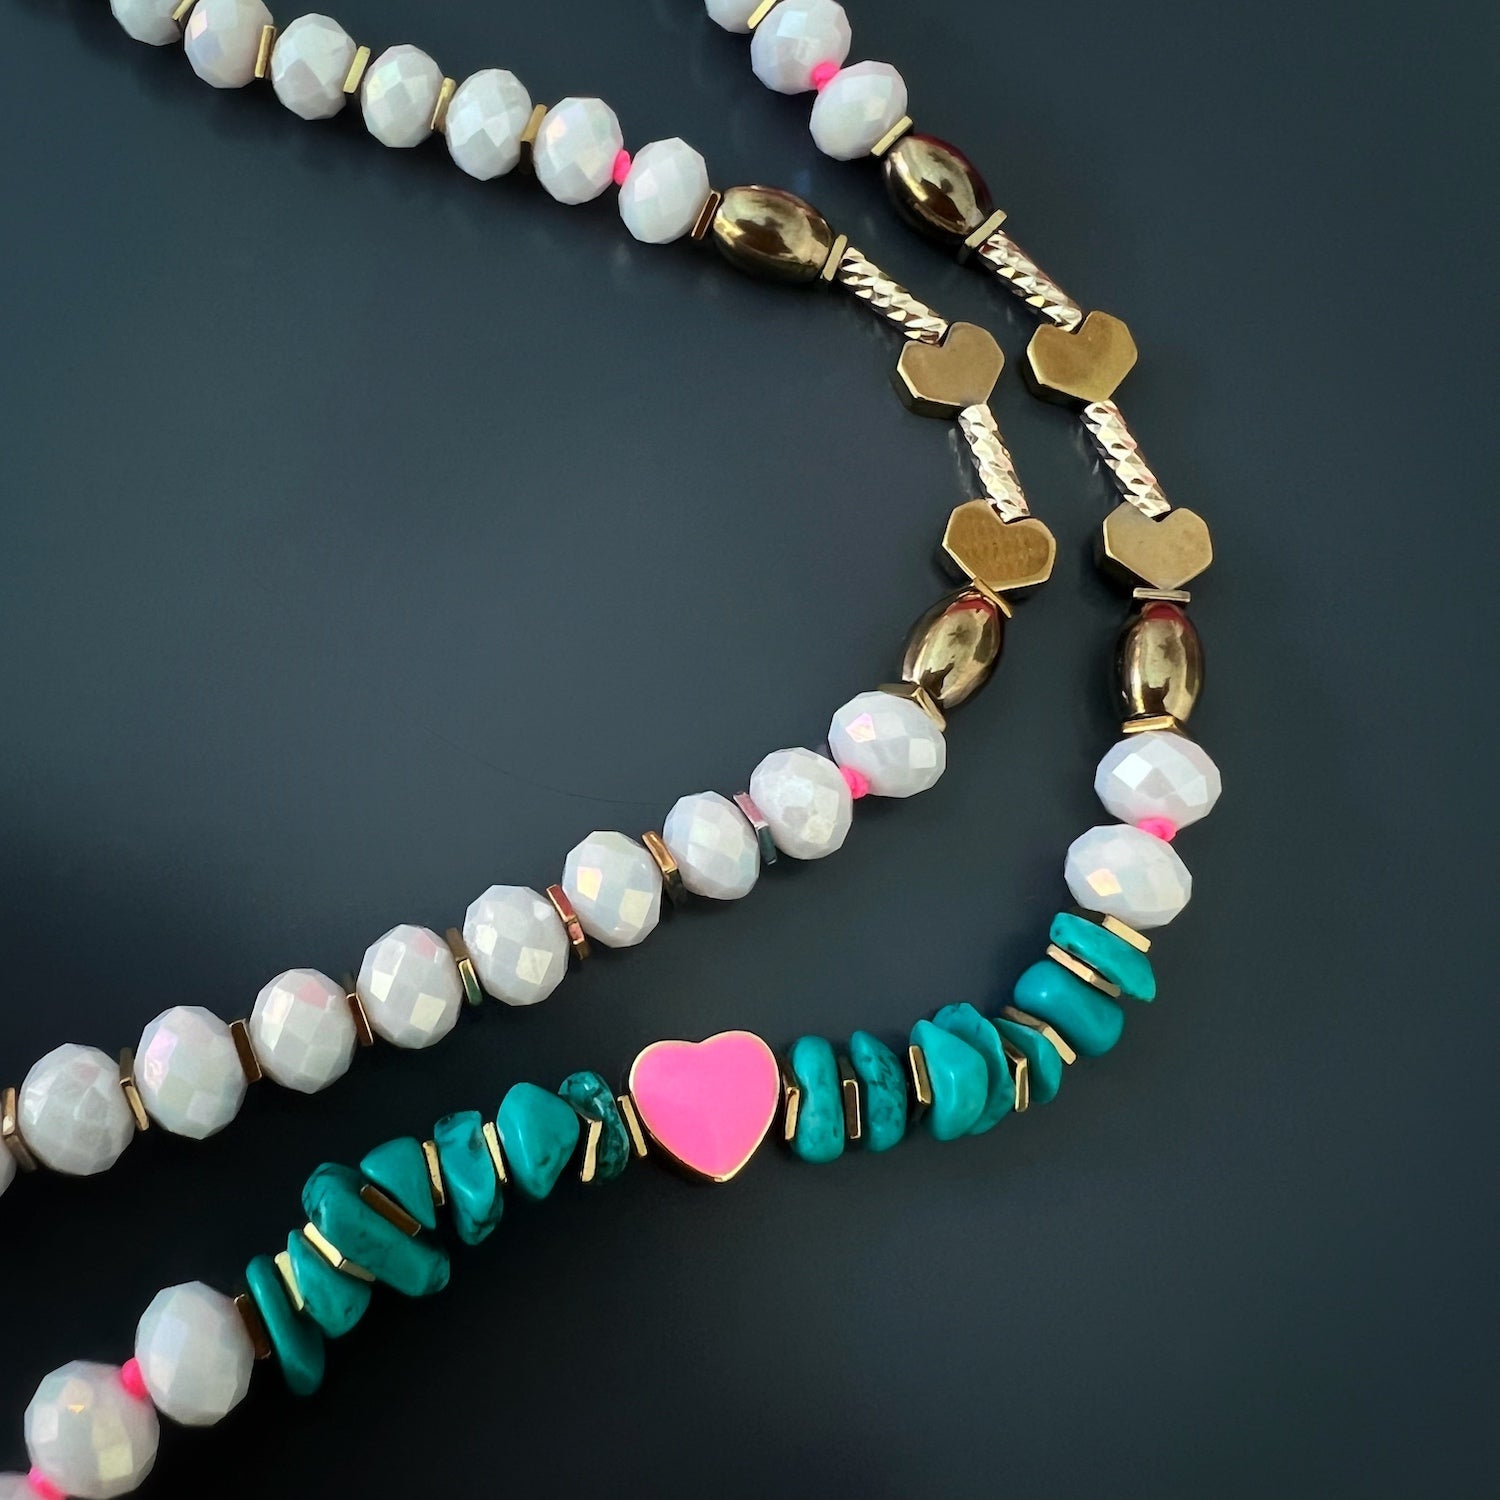 The necklace features turquoise nugget beads, white crystal beads, gold hematite spacers, and a beautiful 18K gold plated pink enamel heart pendant and love charm. 